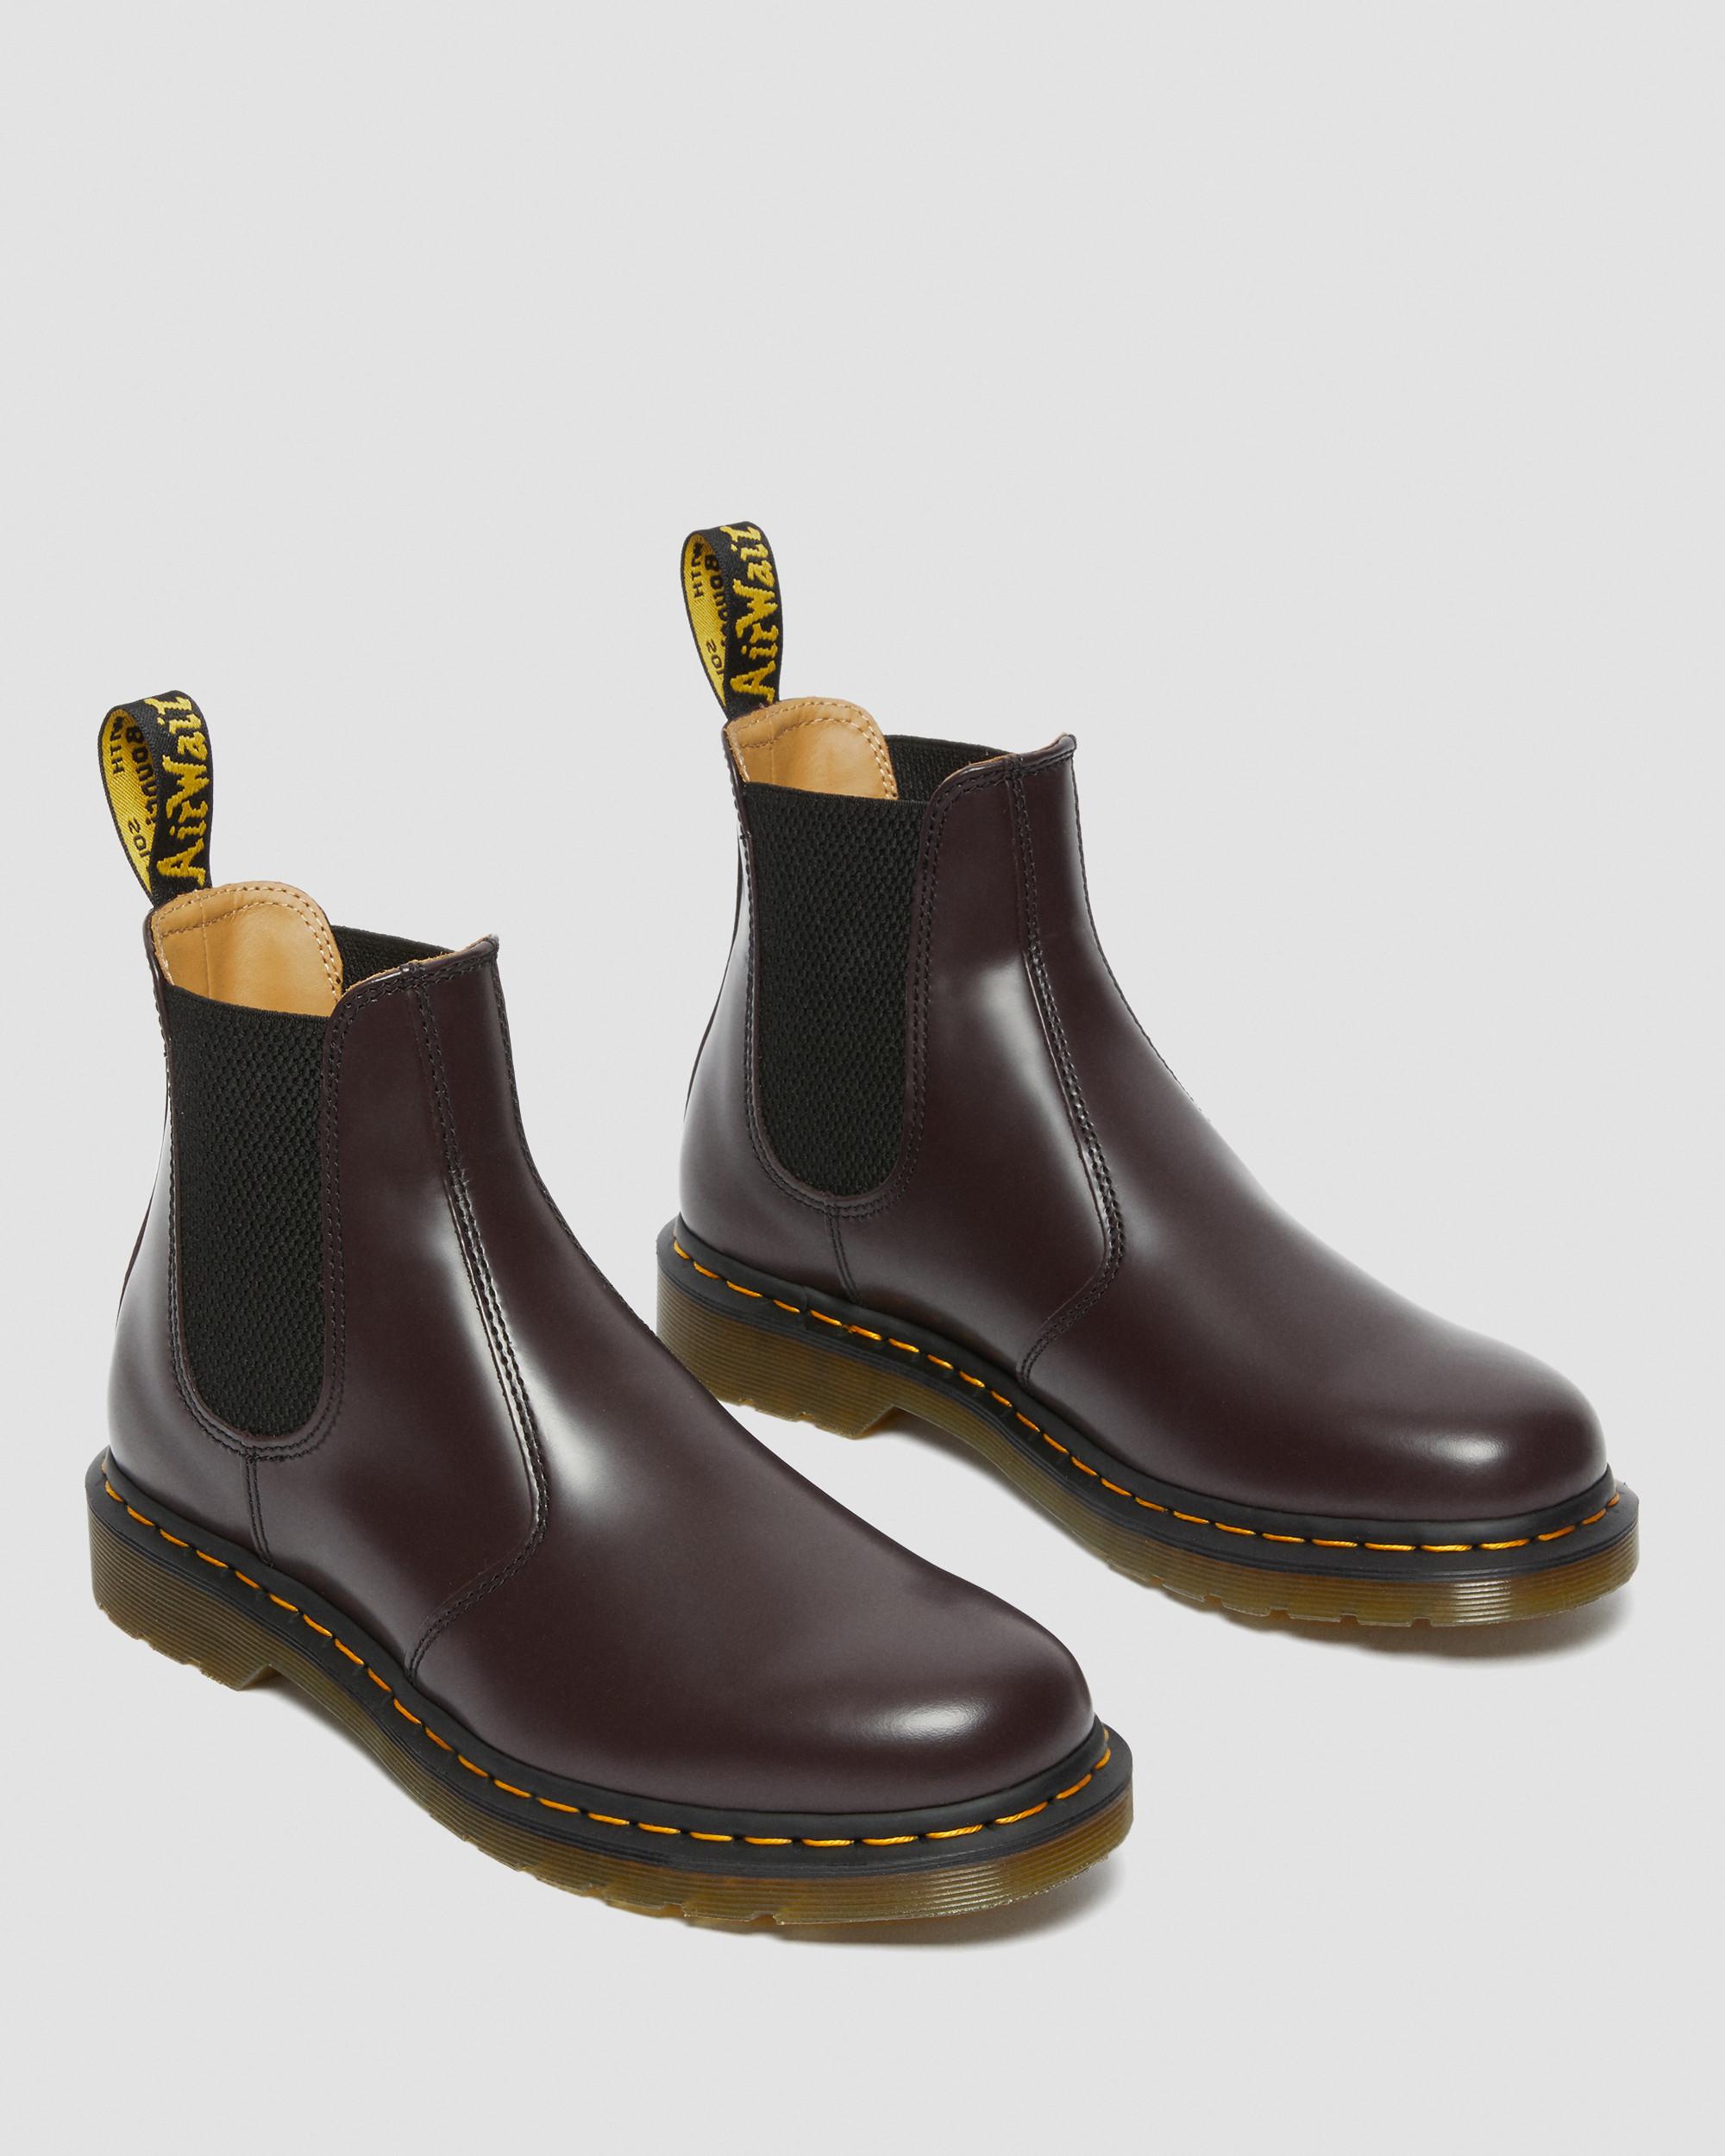 iets Serie van zal ik doen 2976 Yellow Stitch Smooth Leather Chelsea Boots | Dr. Martens